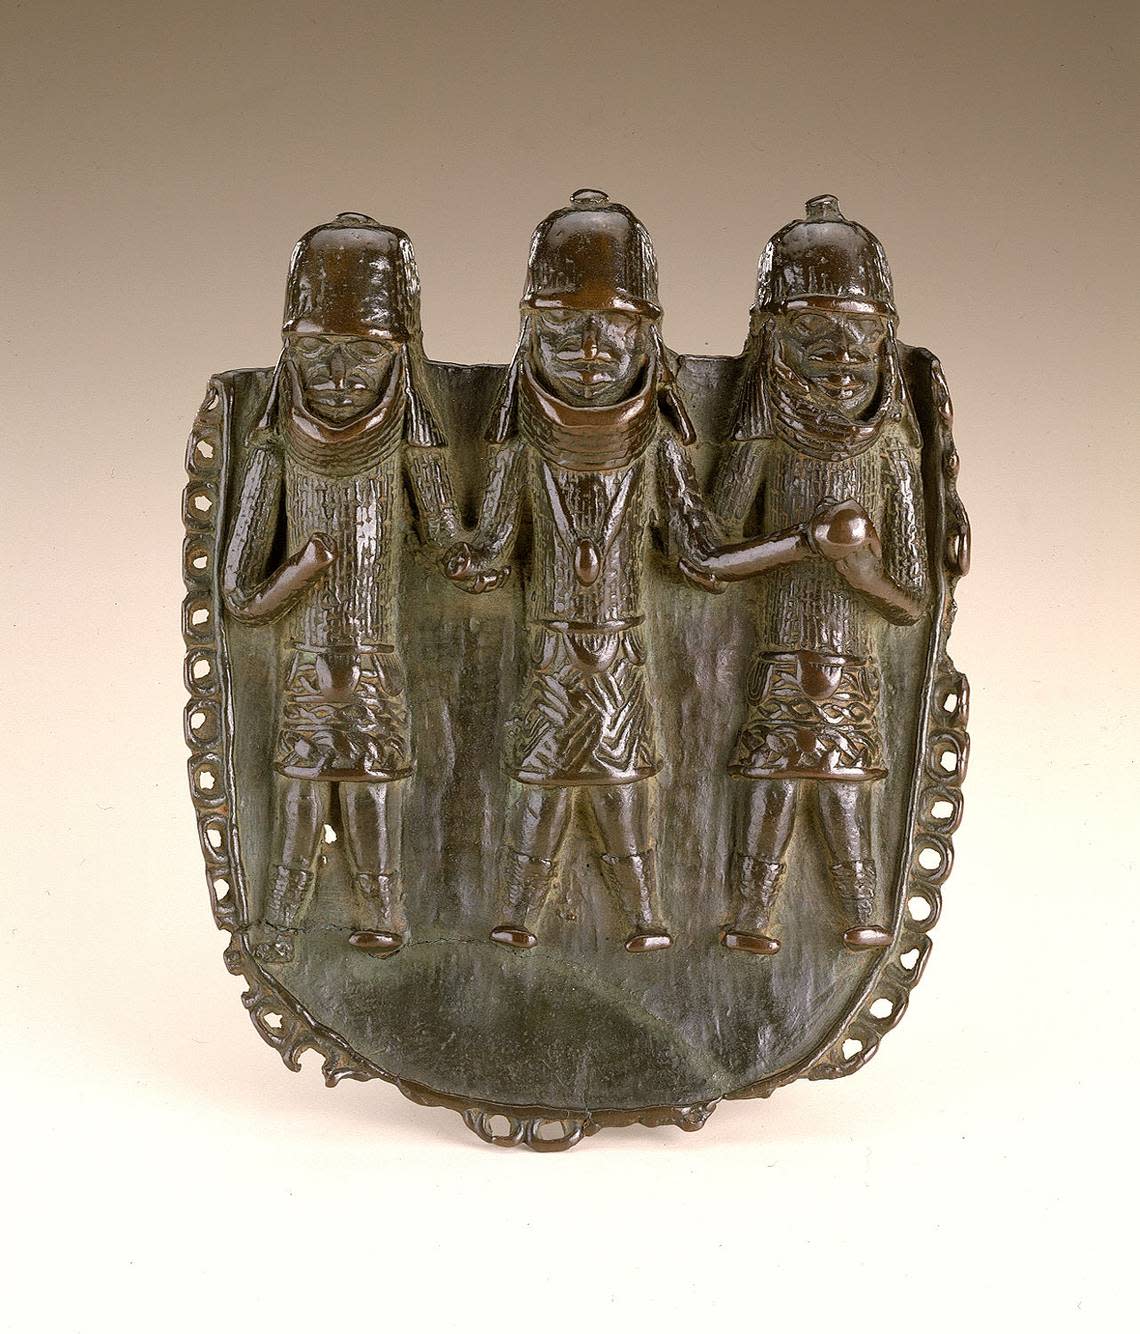 Copper pendant with three figures, the oba (king) in the center and attendants on each side.